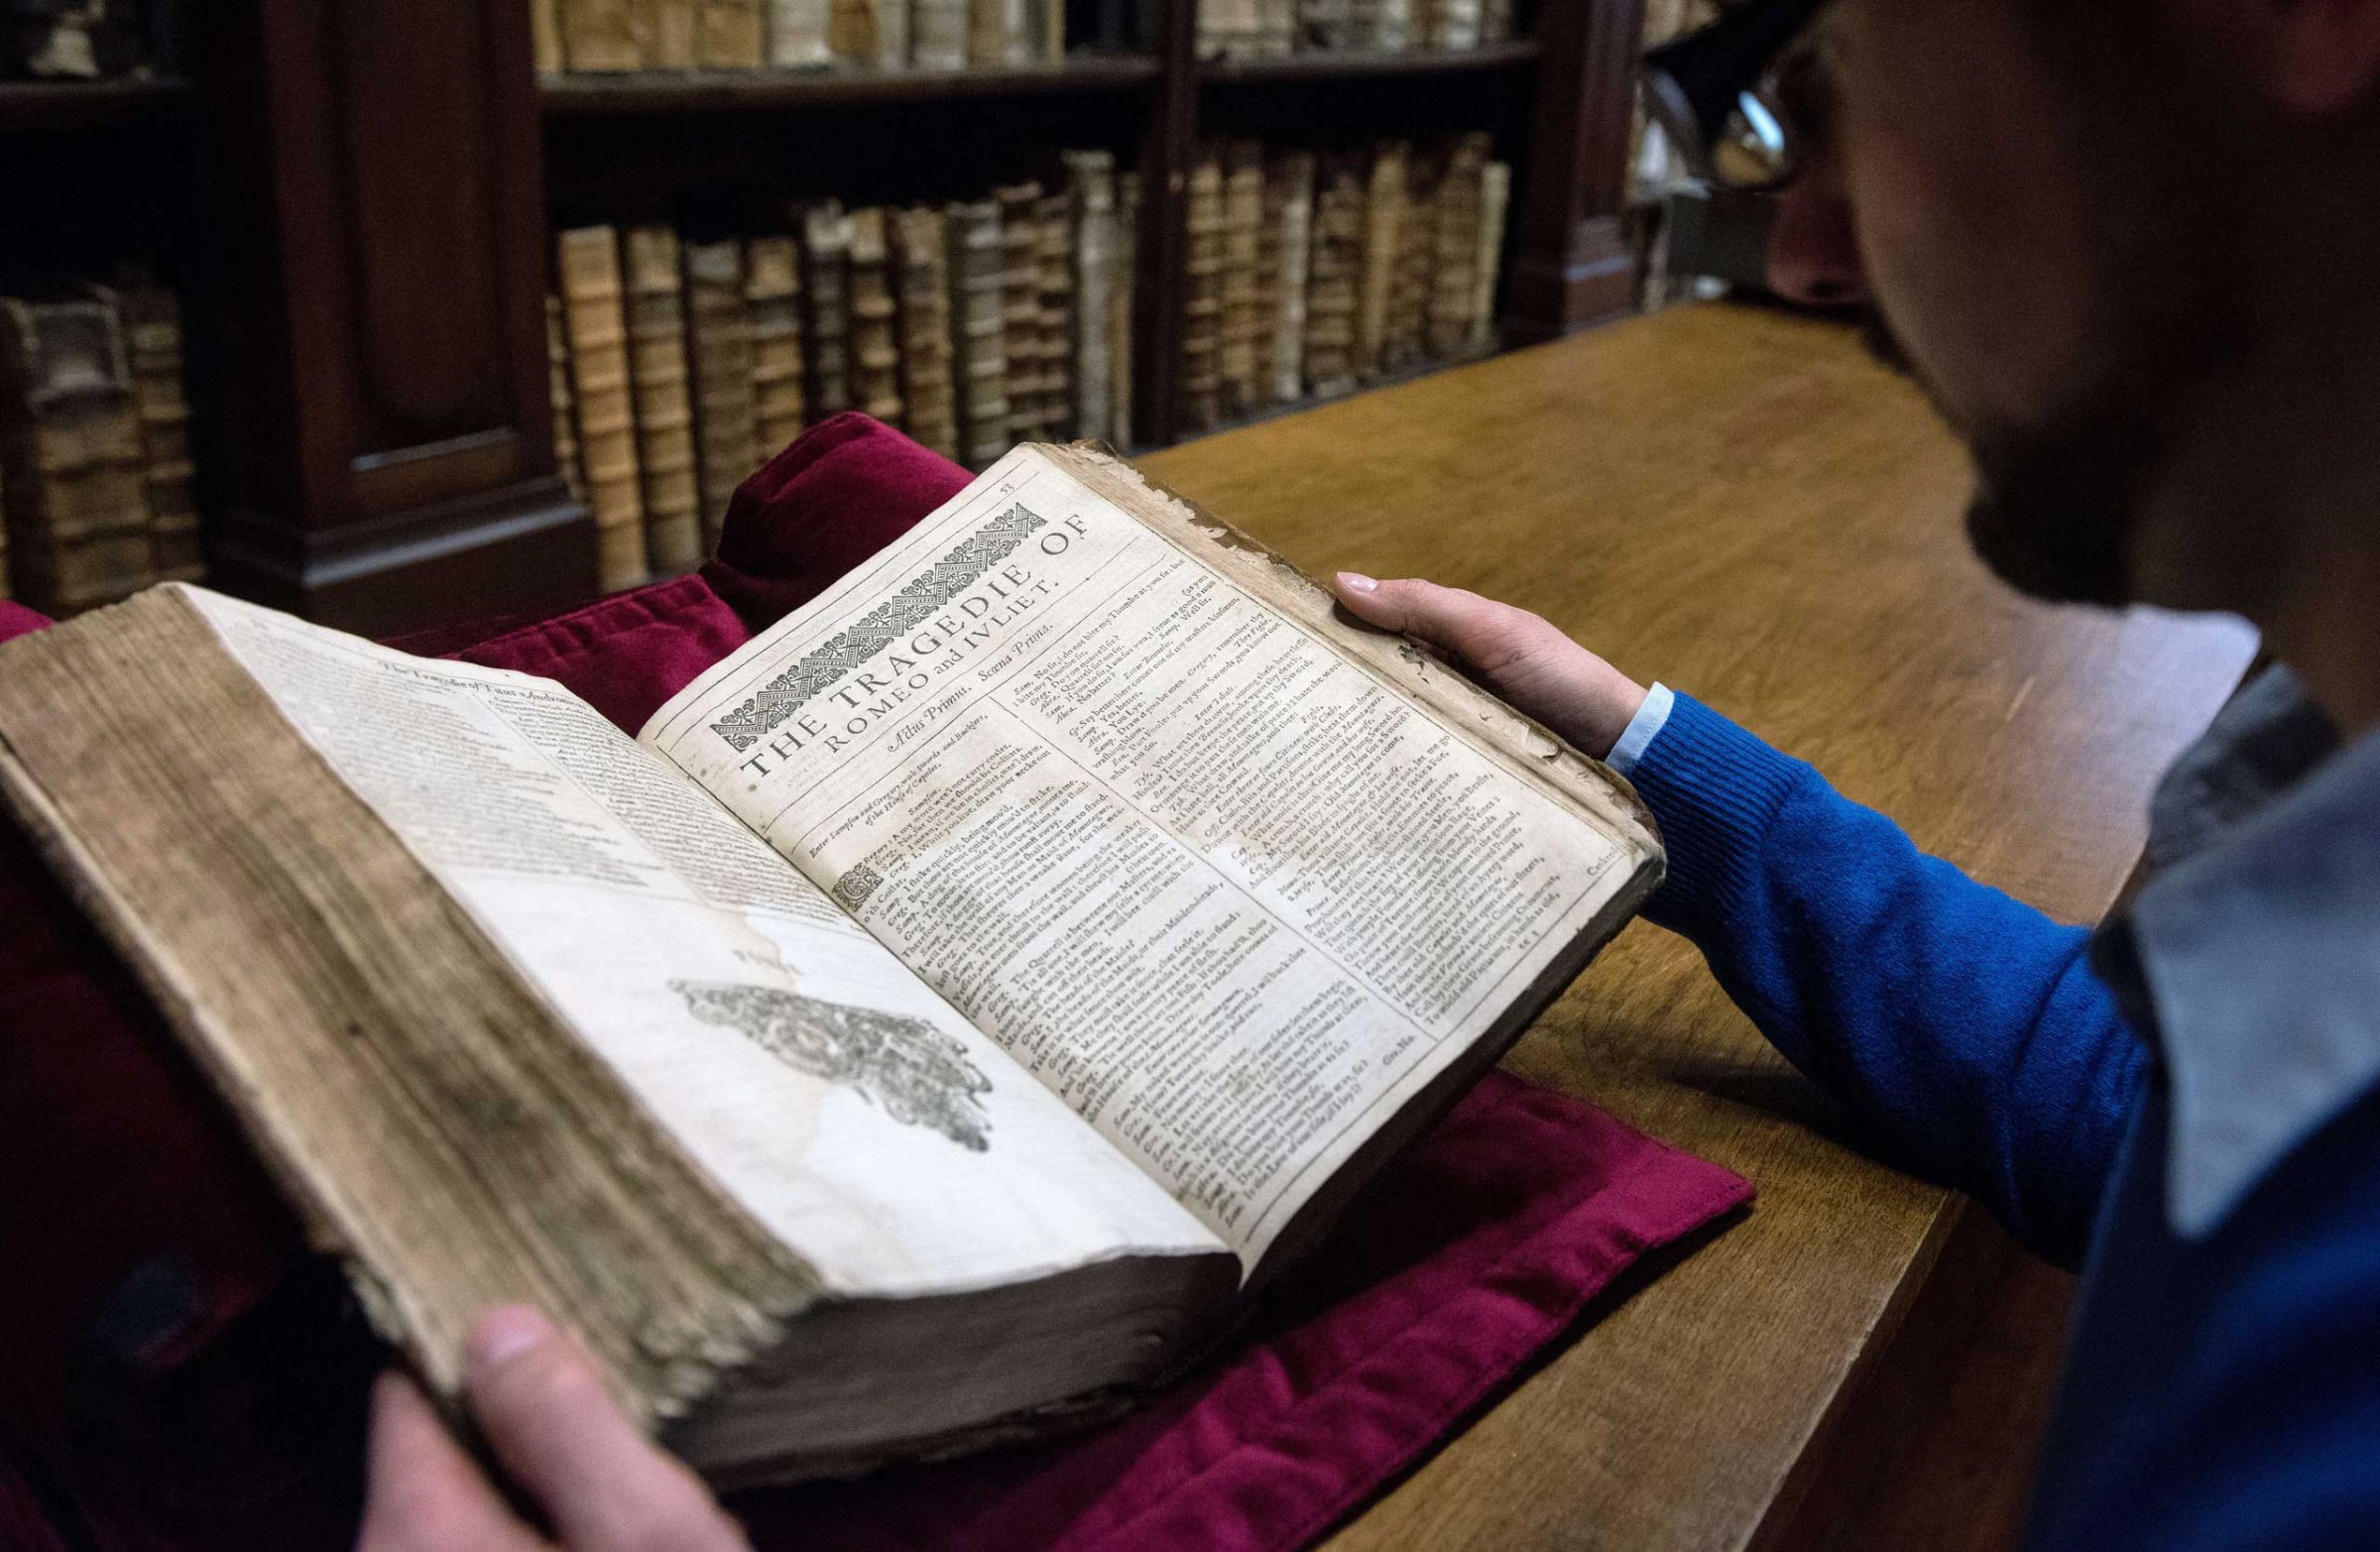 Remy Cordonnier, librarian in the northern town of Saint-Omer, near Calais carefully shows an example of a valuable Shakespeare "First Folio", a collection of some of his plays, dating from 1623.